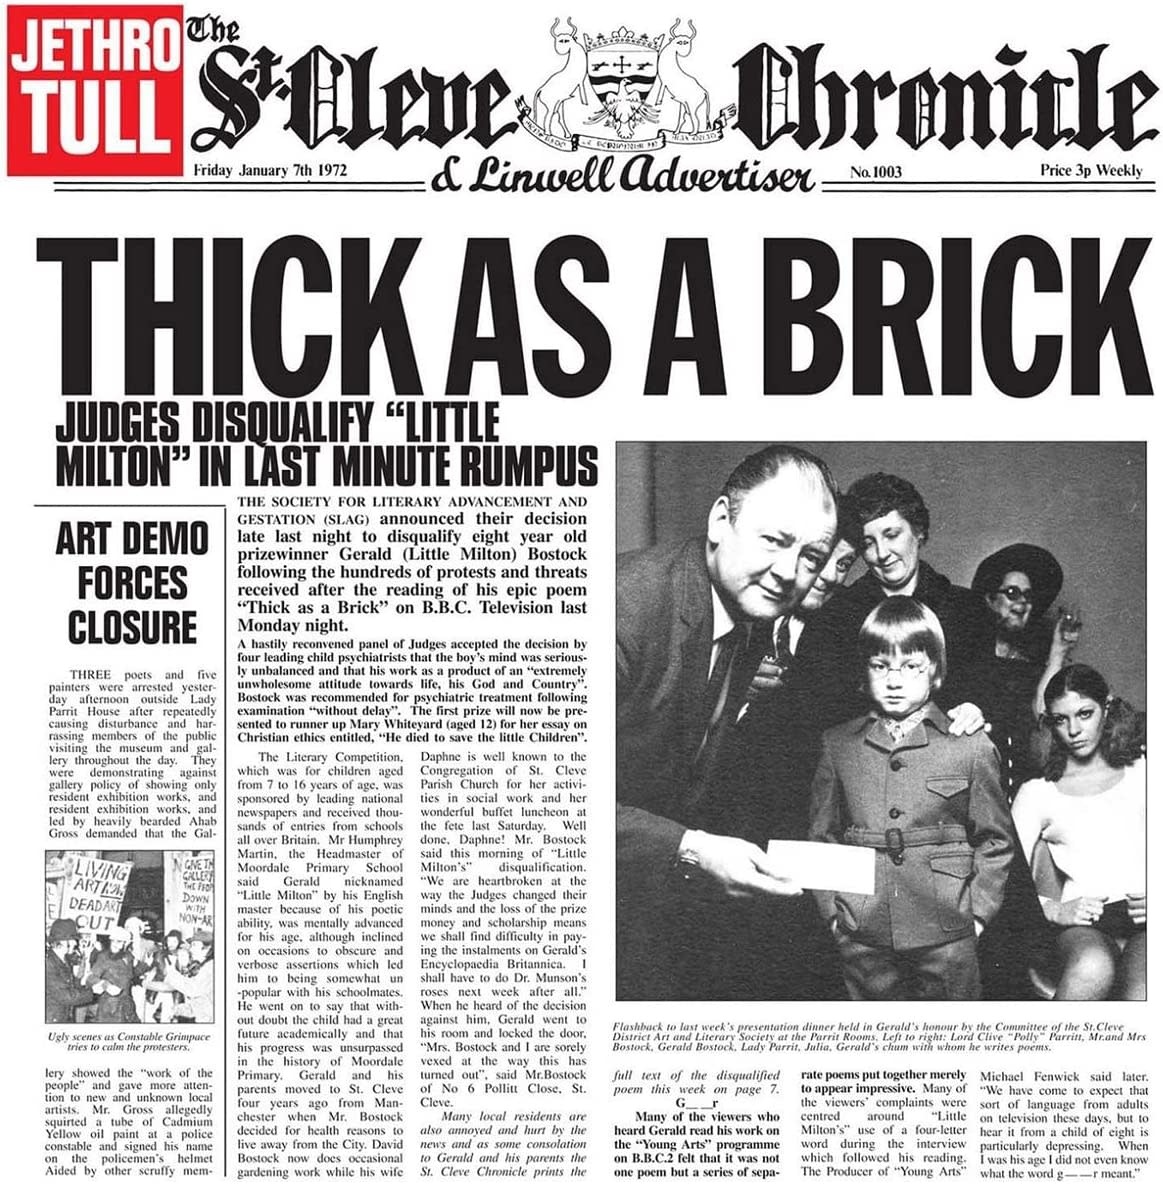 Rock/Pop Jethro Tull - Thick As A Brick (50th Ann. Half-Speed Master Remixed by Steven Wilson)